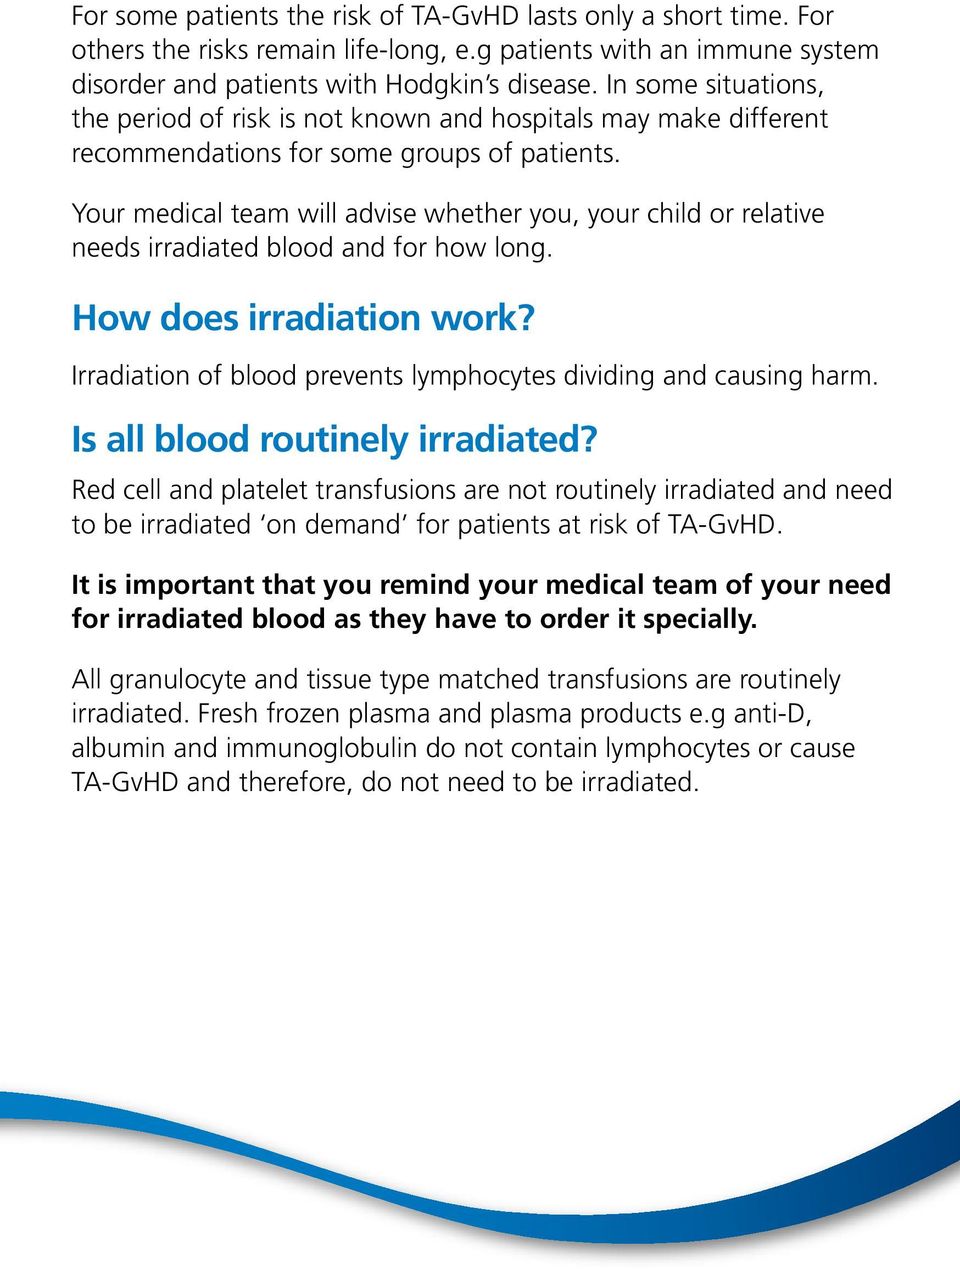 Your medical team will advise whether you, your child or relative needs irradiated blood and for how long. How does irradiation work?